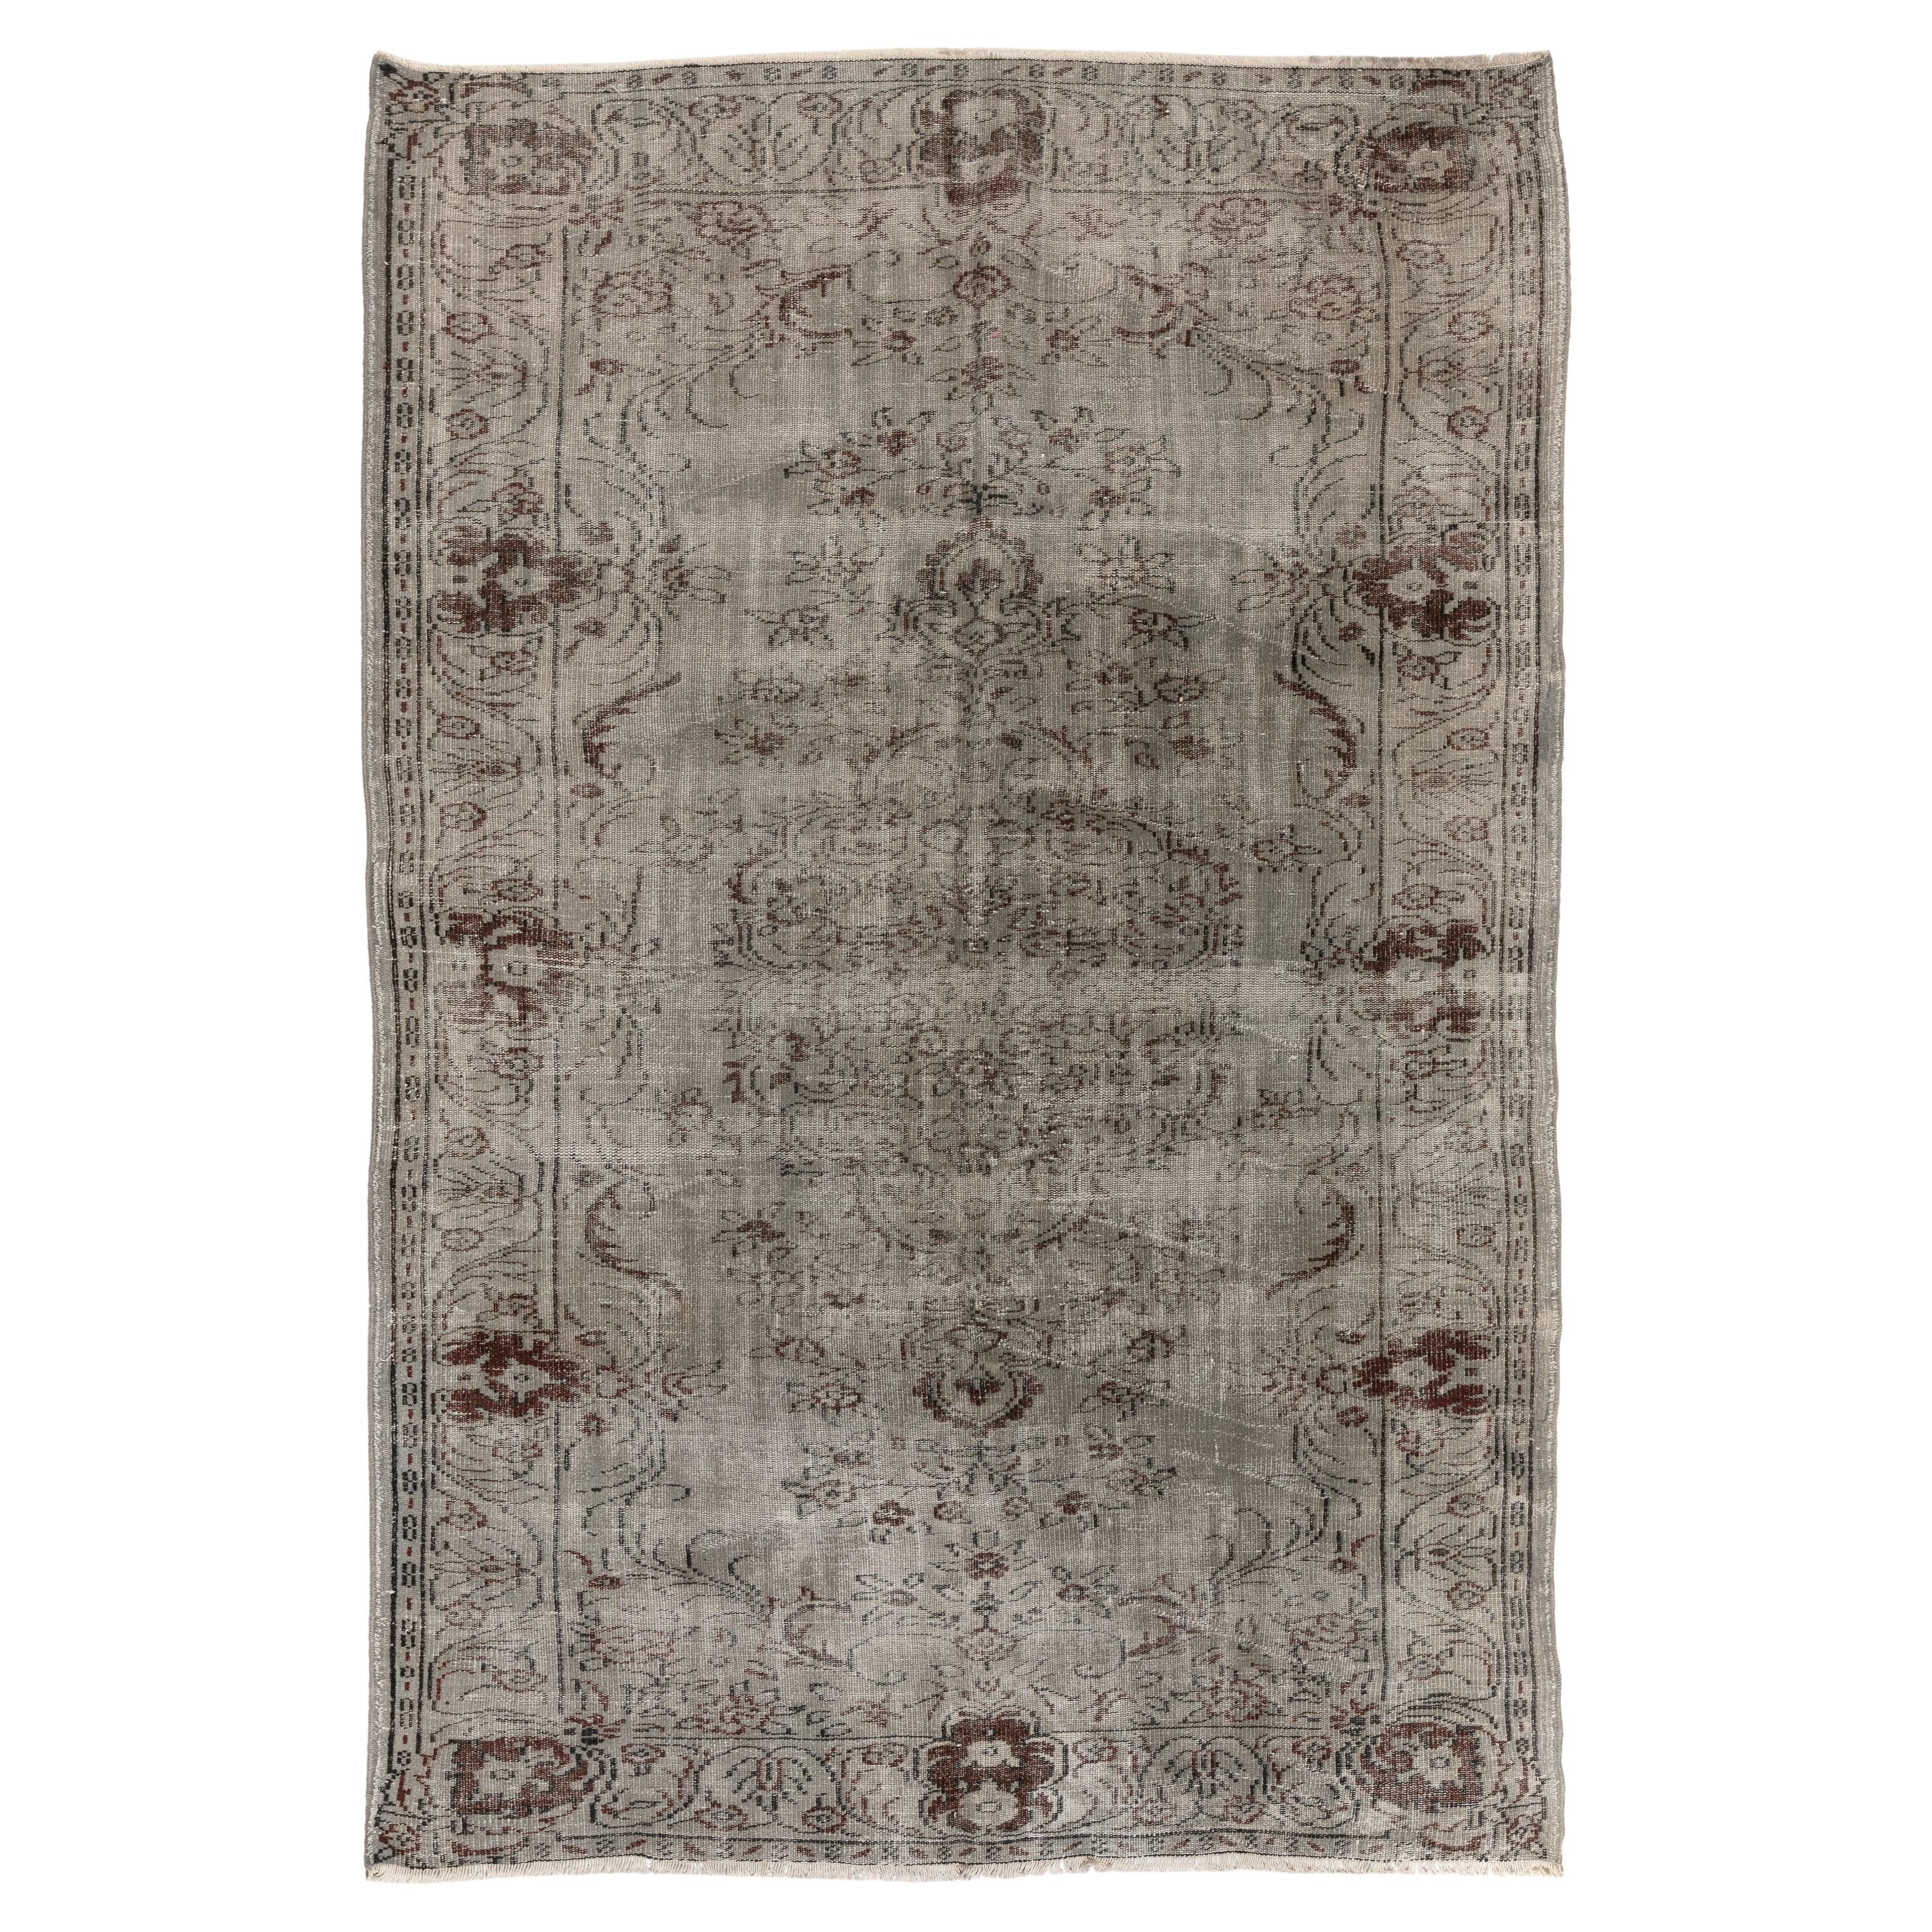 6.3x9 ft Vintage Handmade Turkish Area Rug in Gray with Floral Medallion Design For Sale